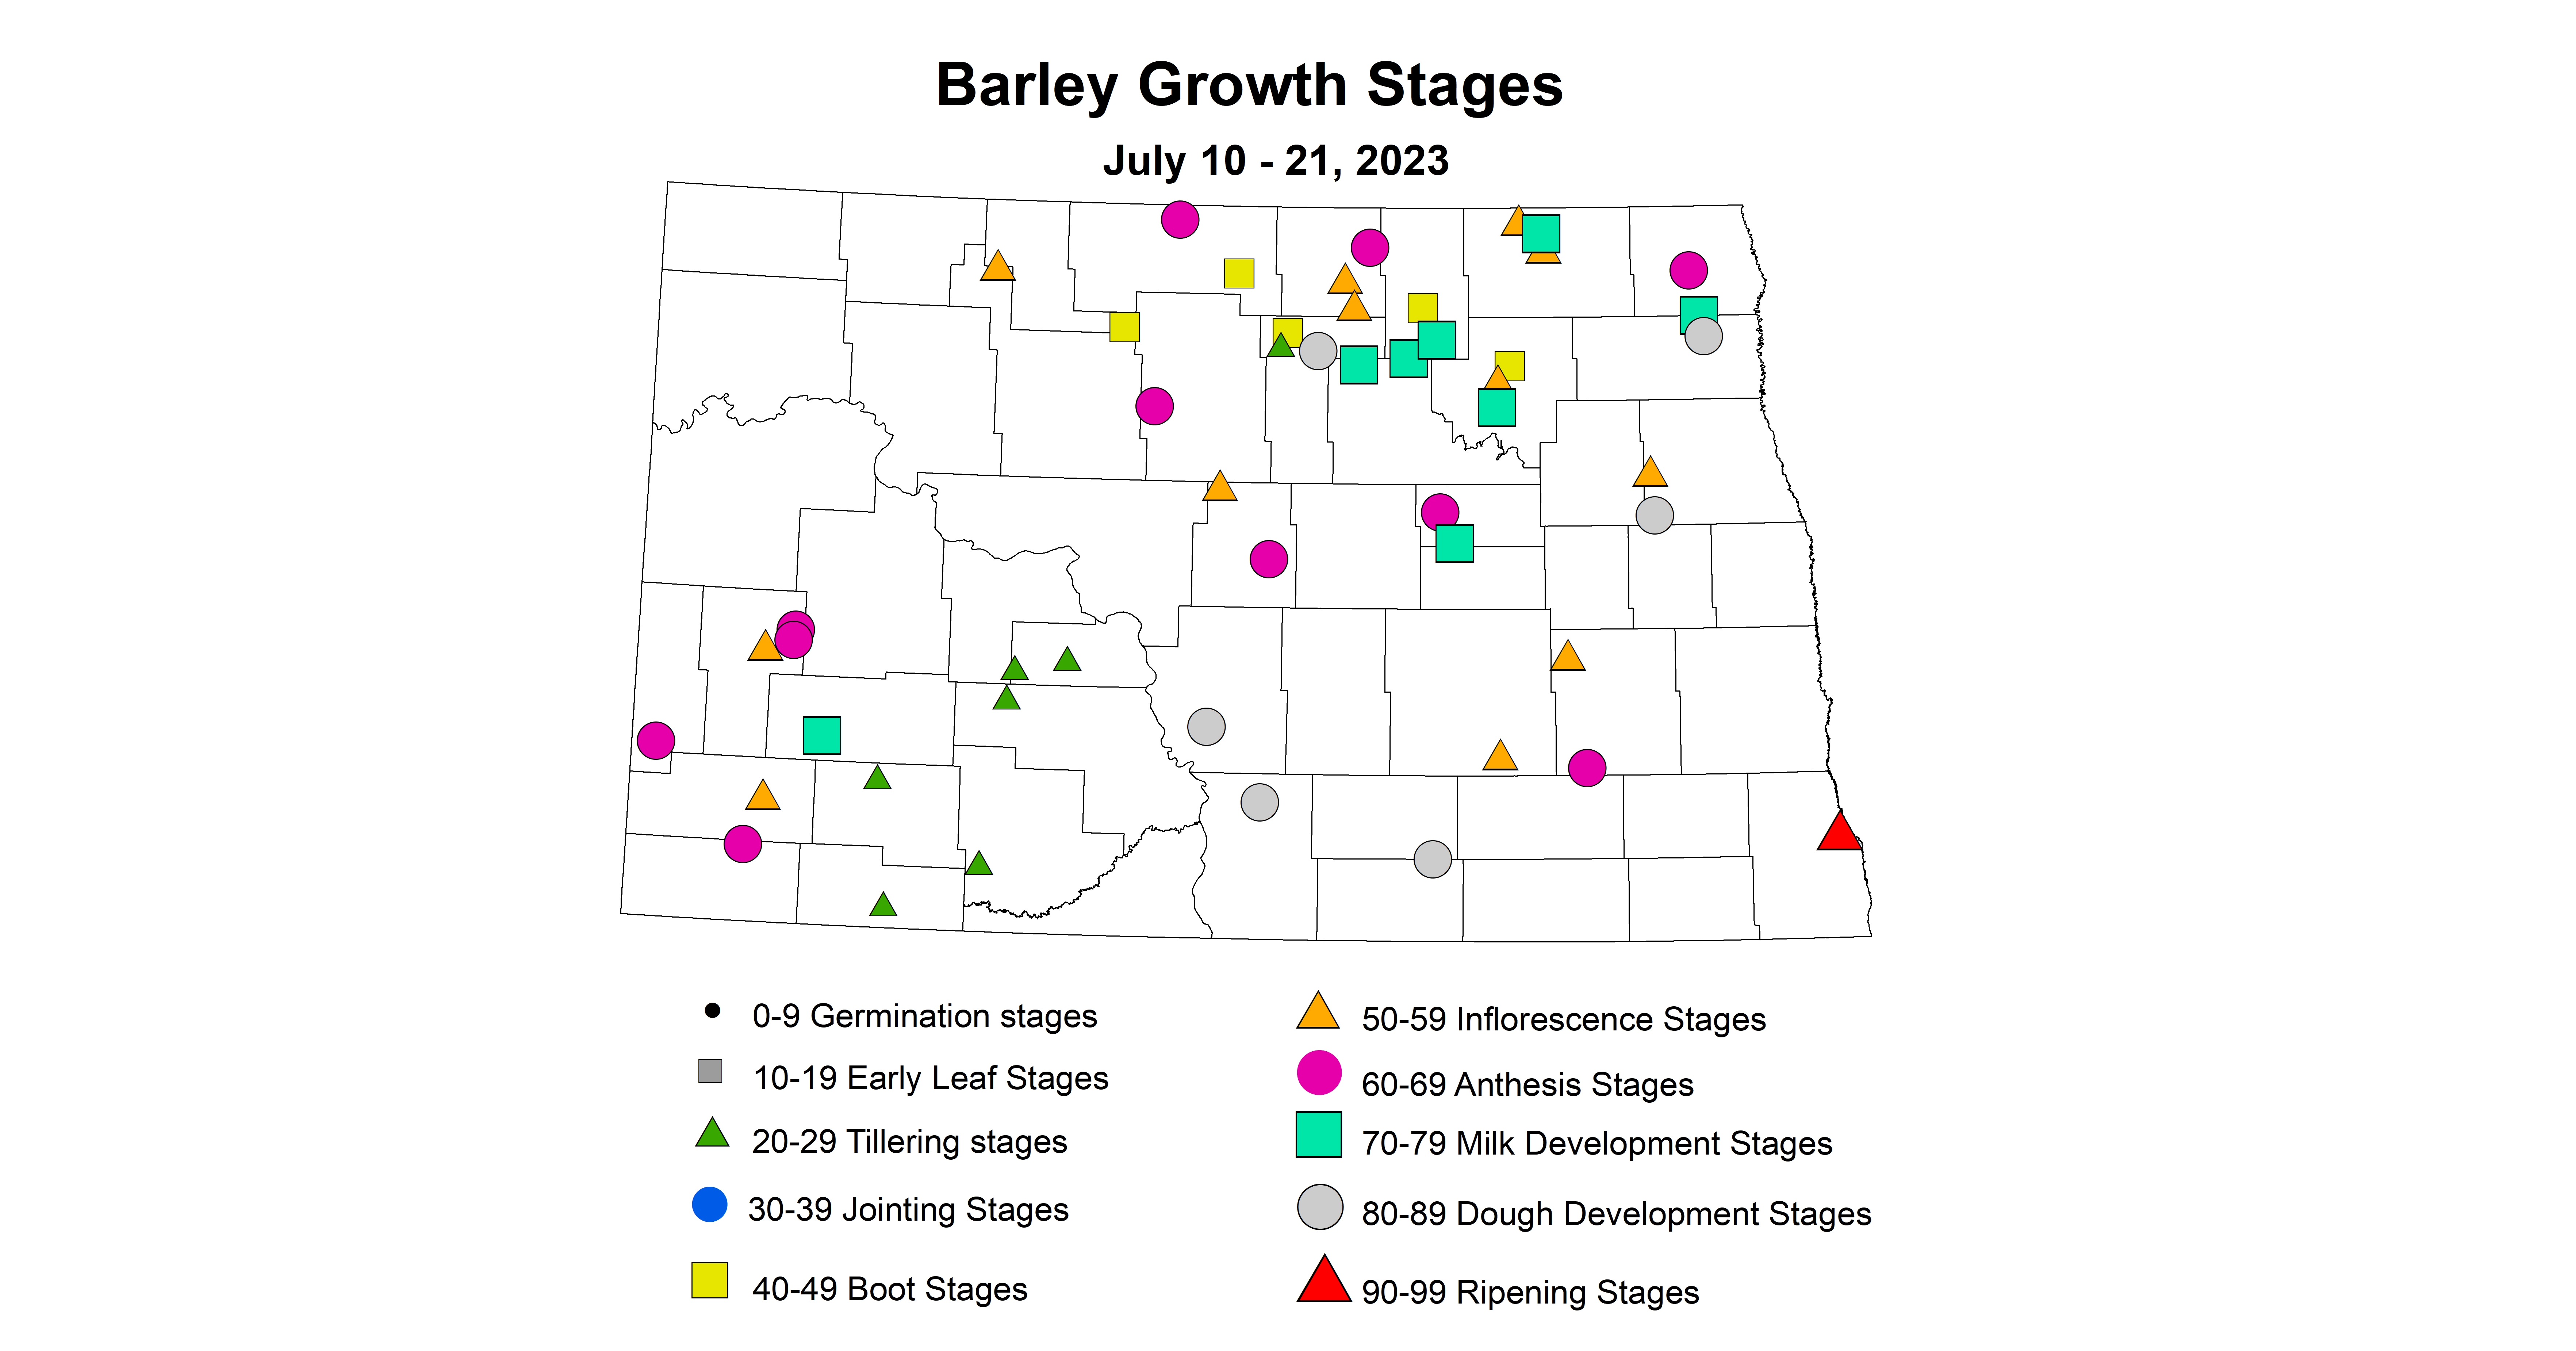 barley growth stages July 10-21 2023